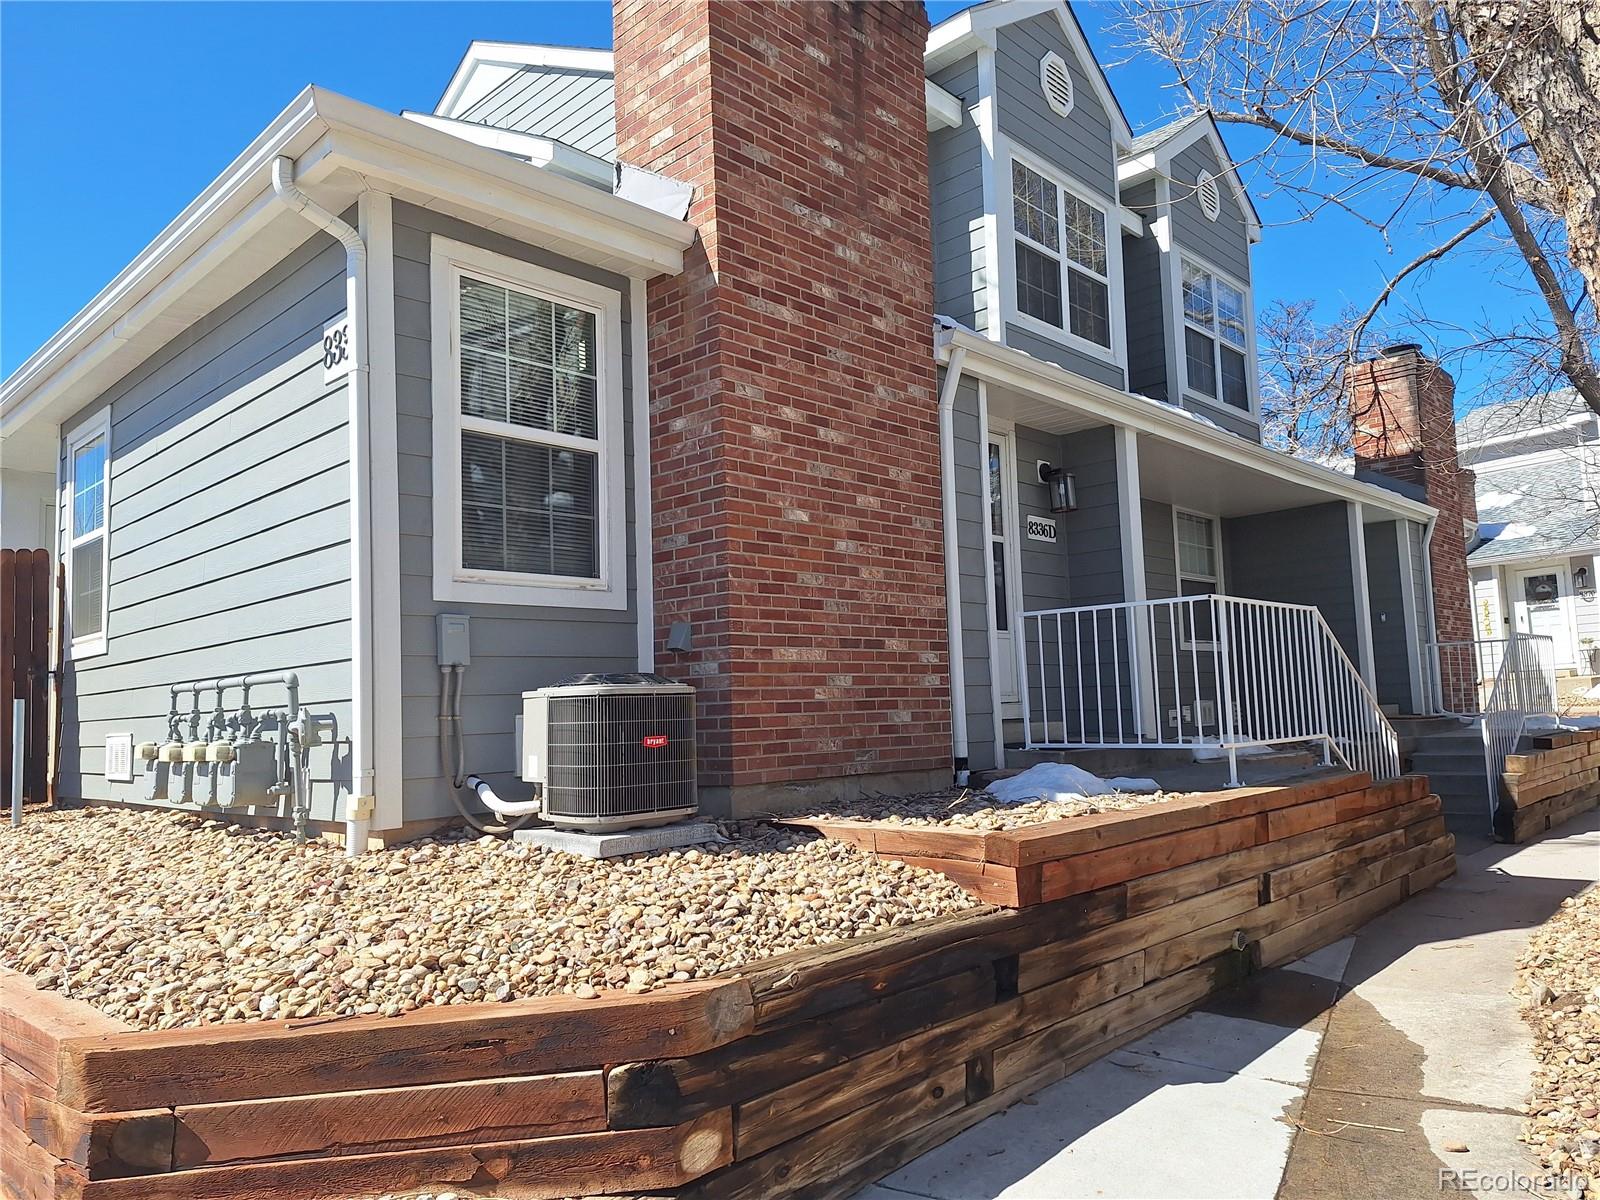 8336 W 87th Drive, arvada MLS: 2650336 Beds: 2 Baths: 2 Price: $410,000